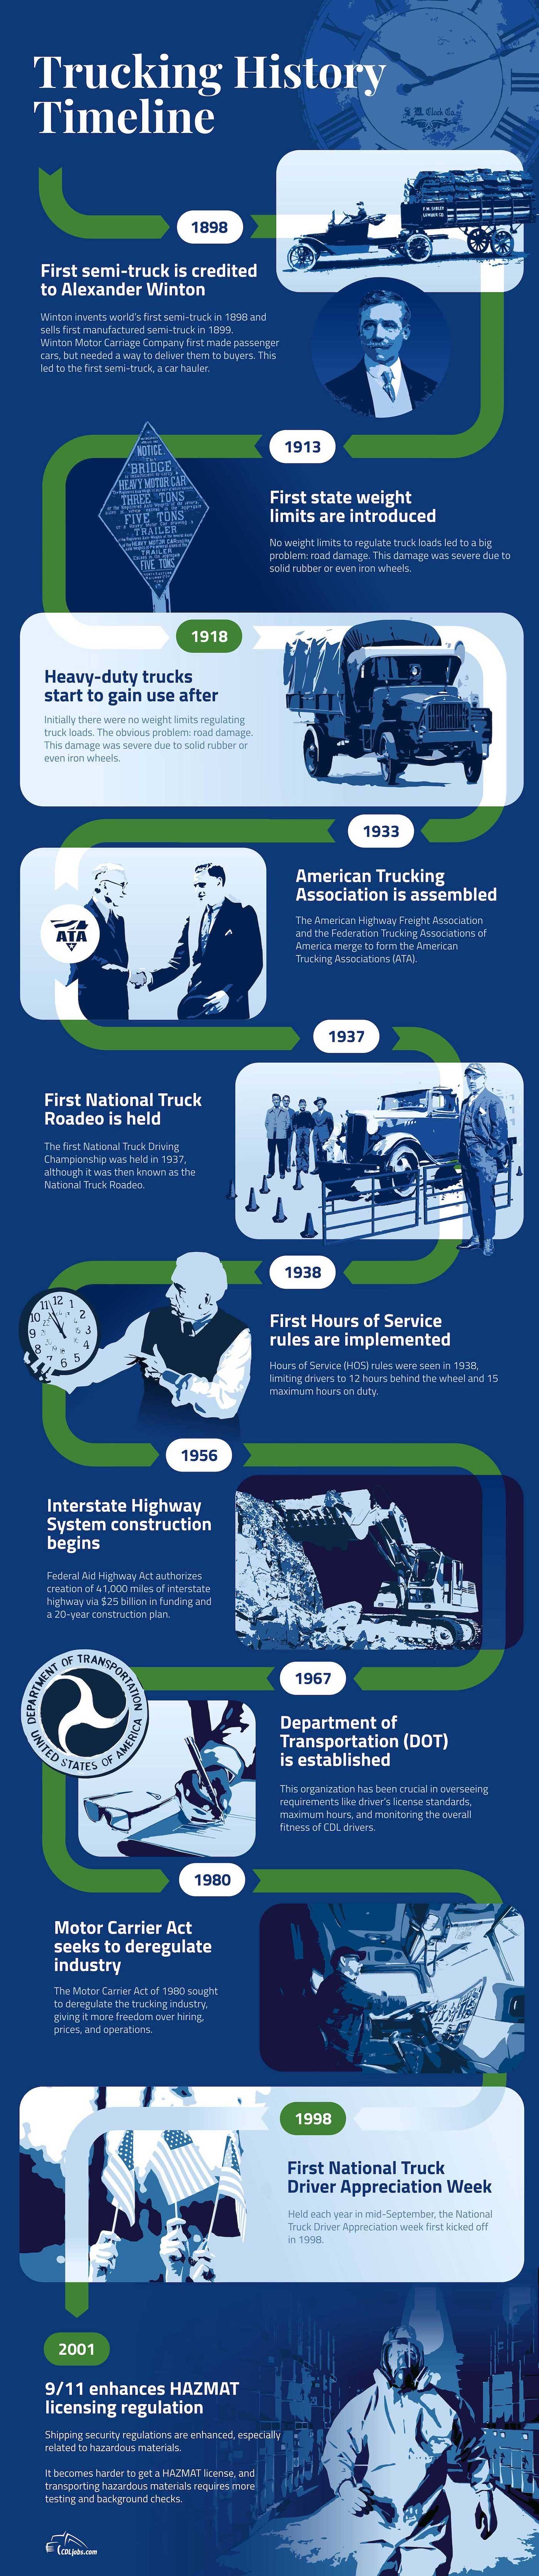 trucking history timeline infographic